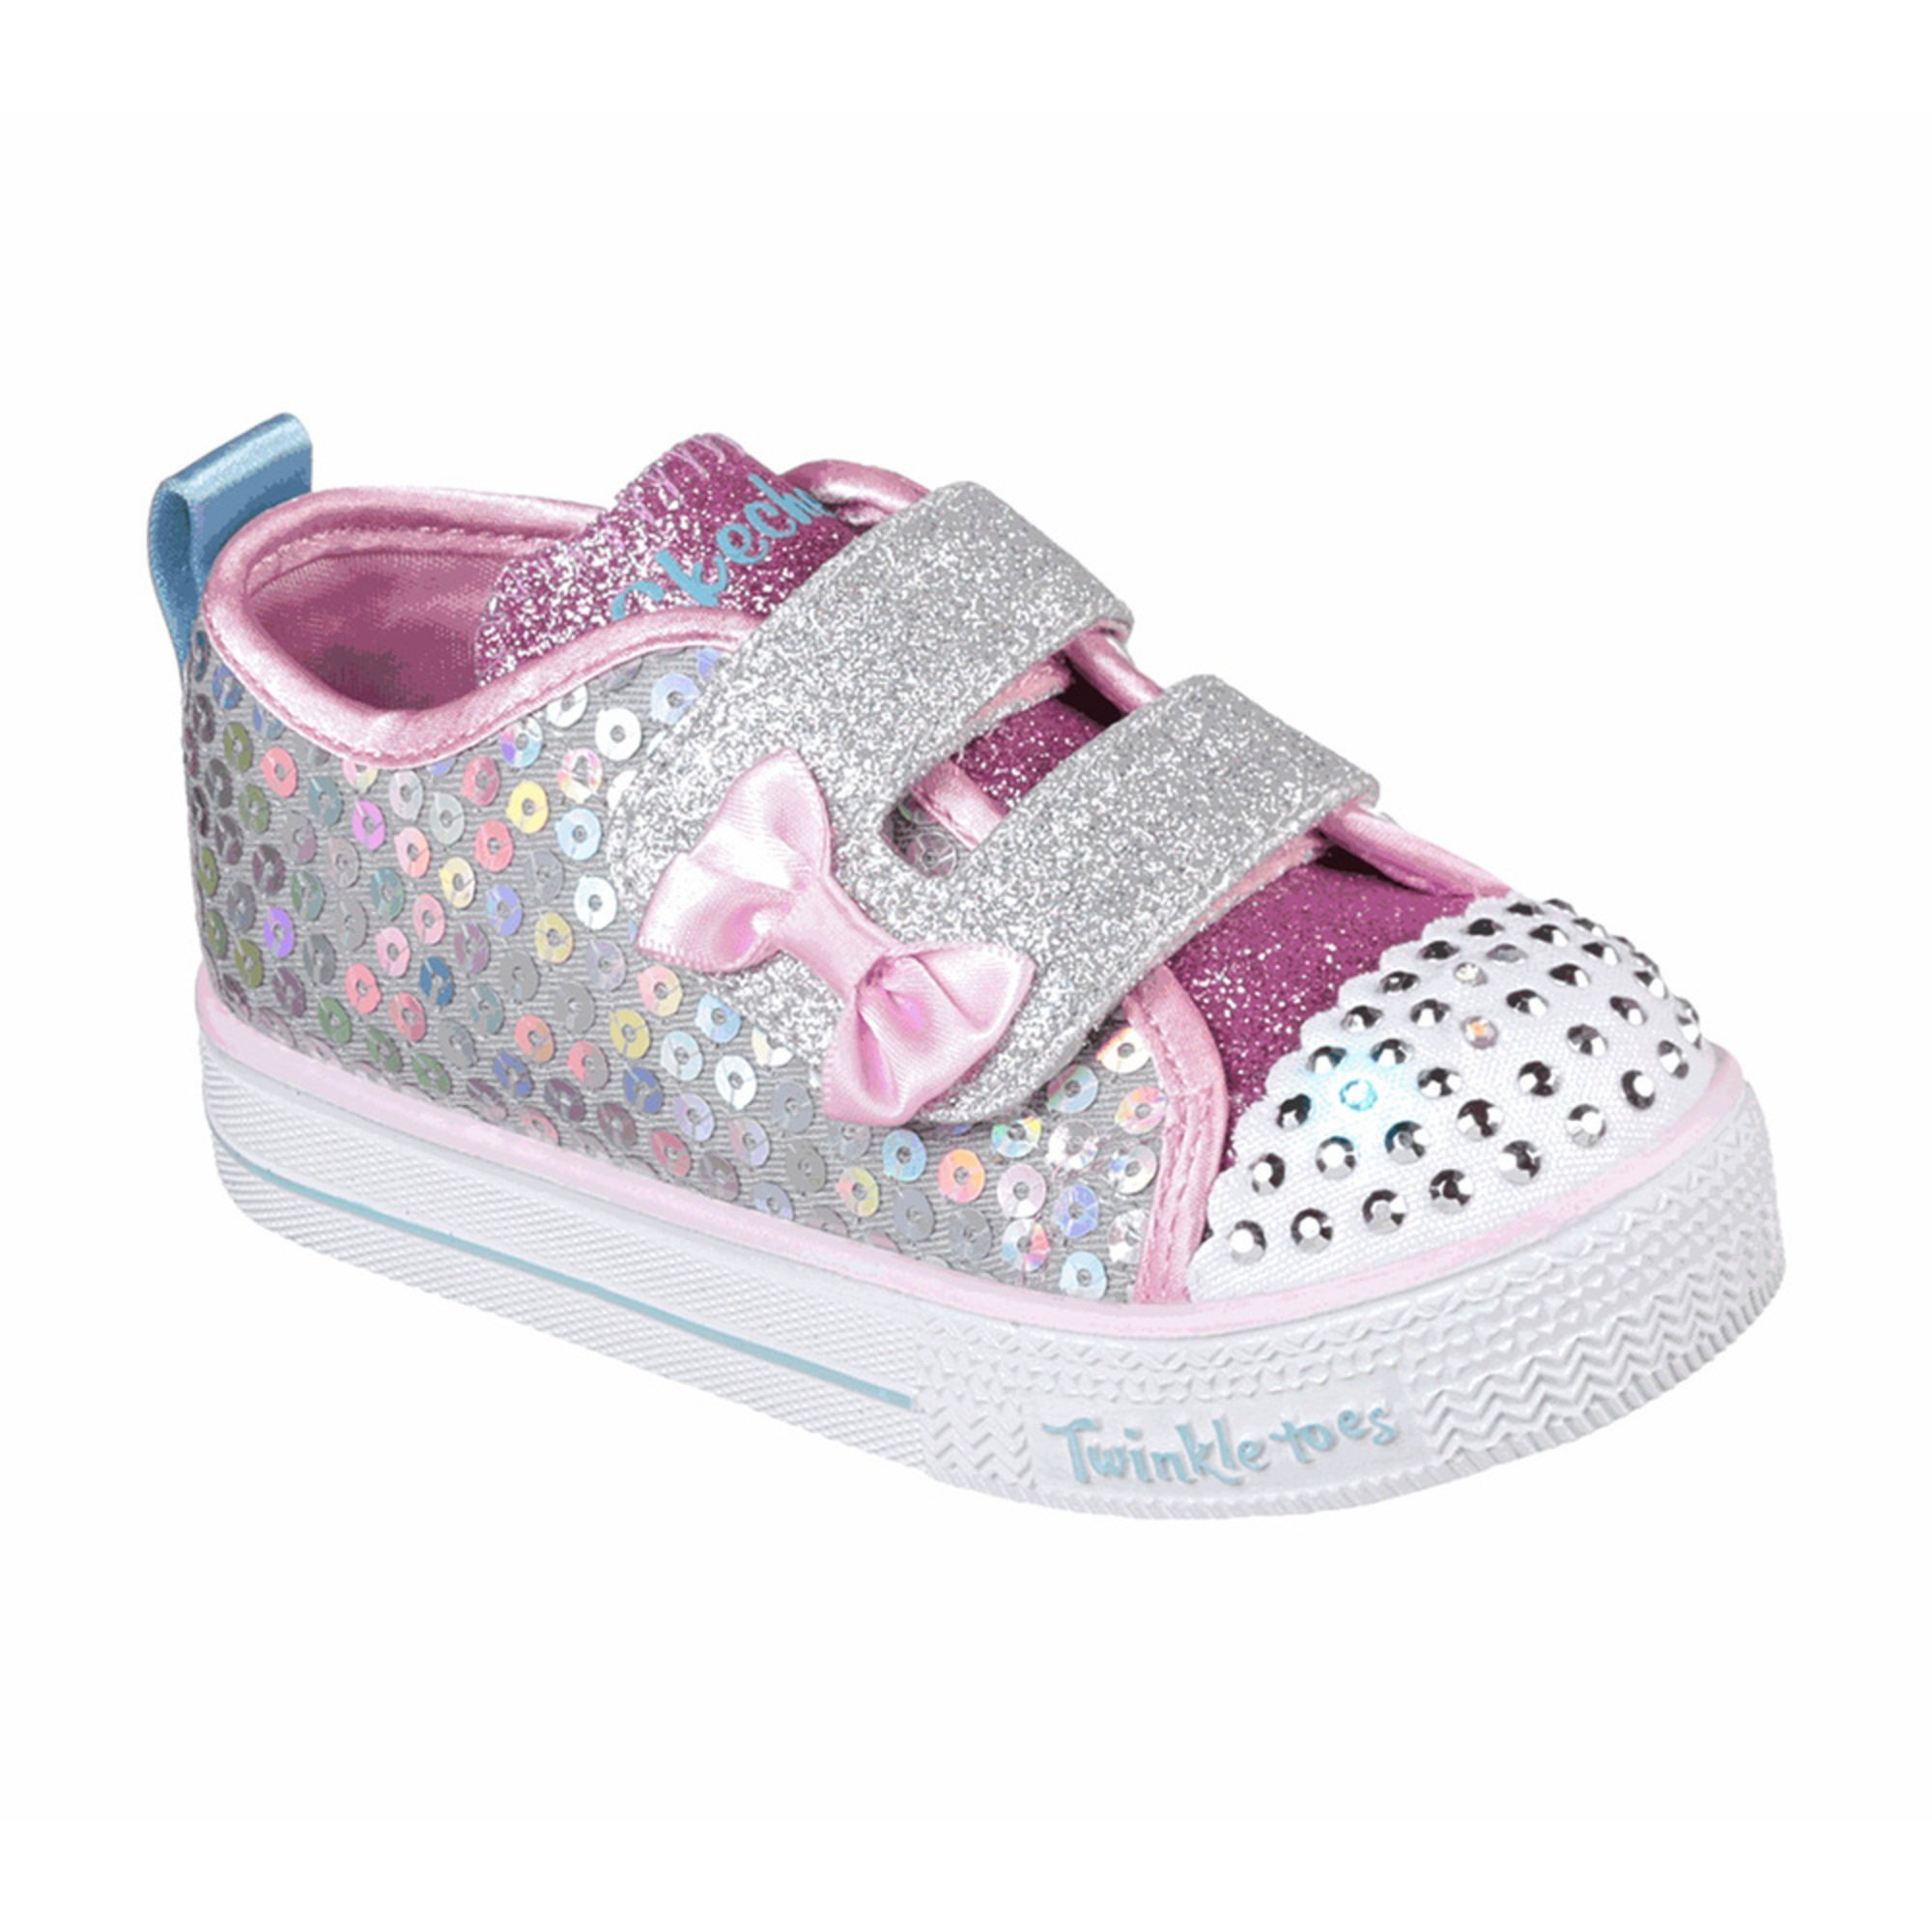 women's twinkle toes shoes